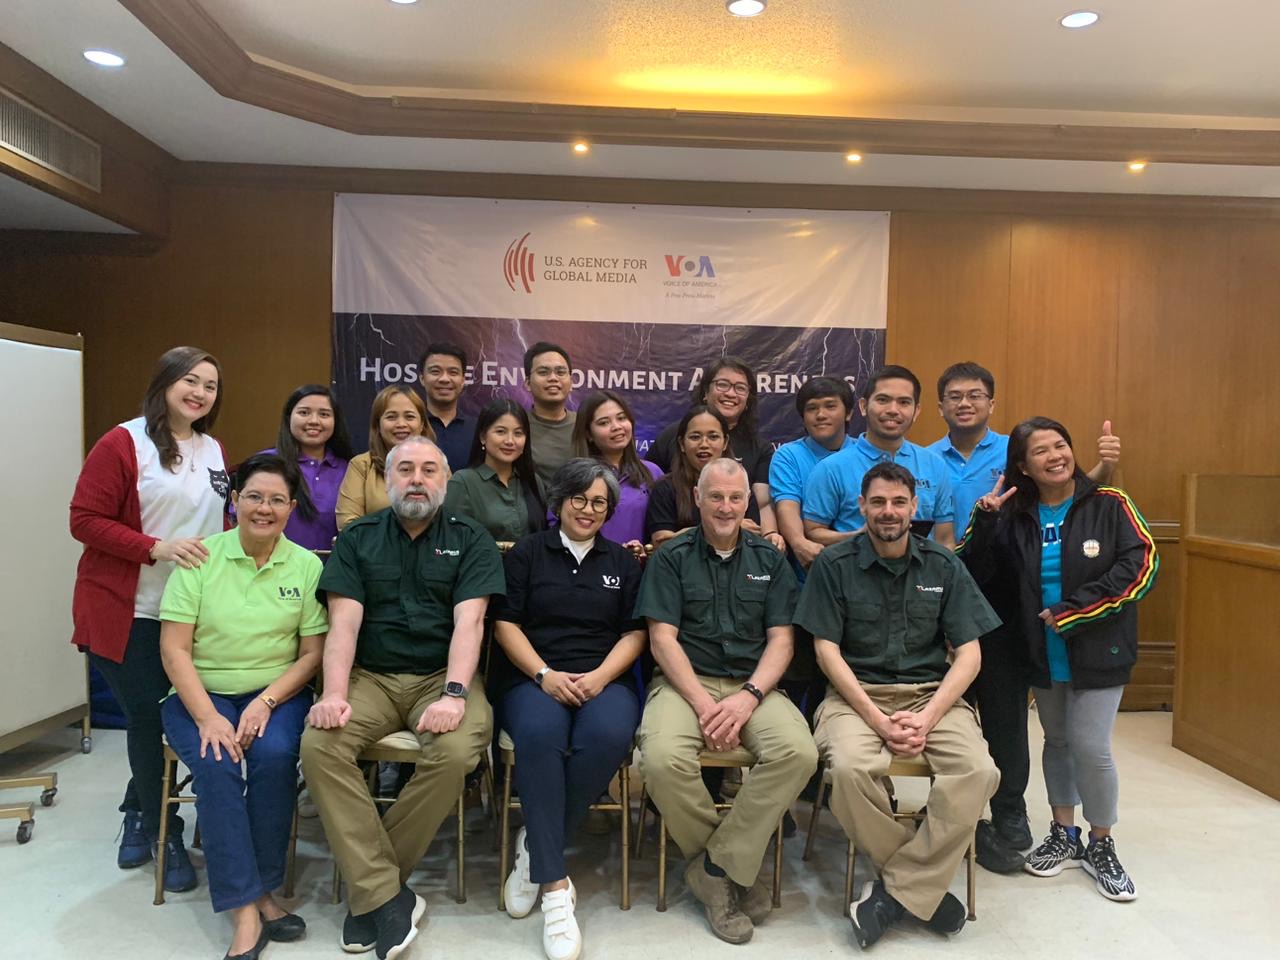 Hostile environments and first aid training in Philippines